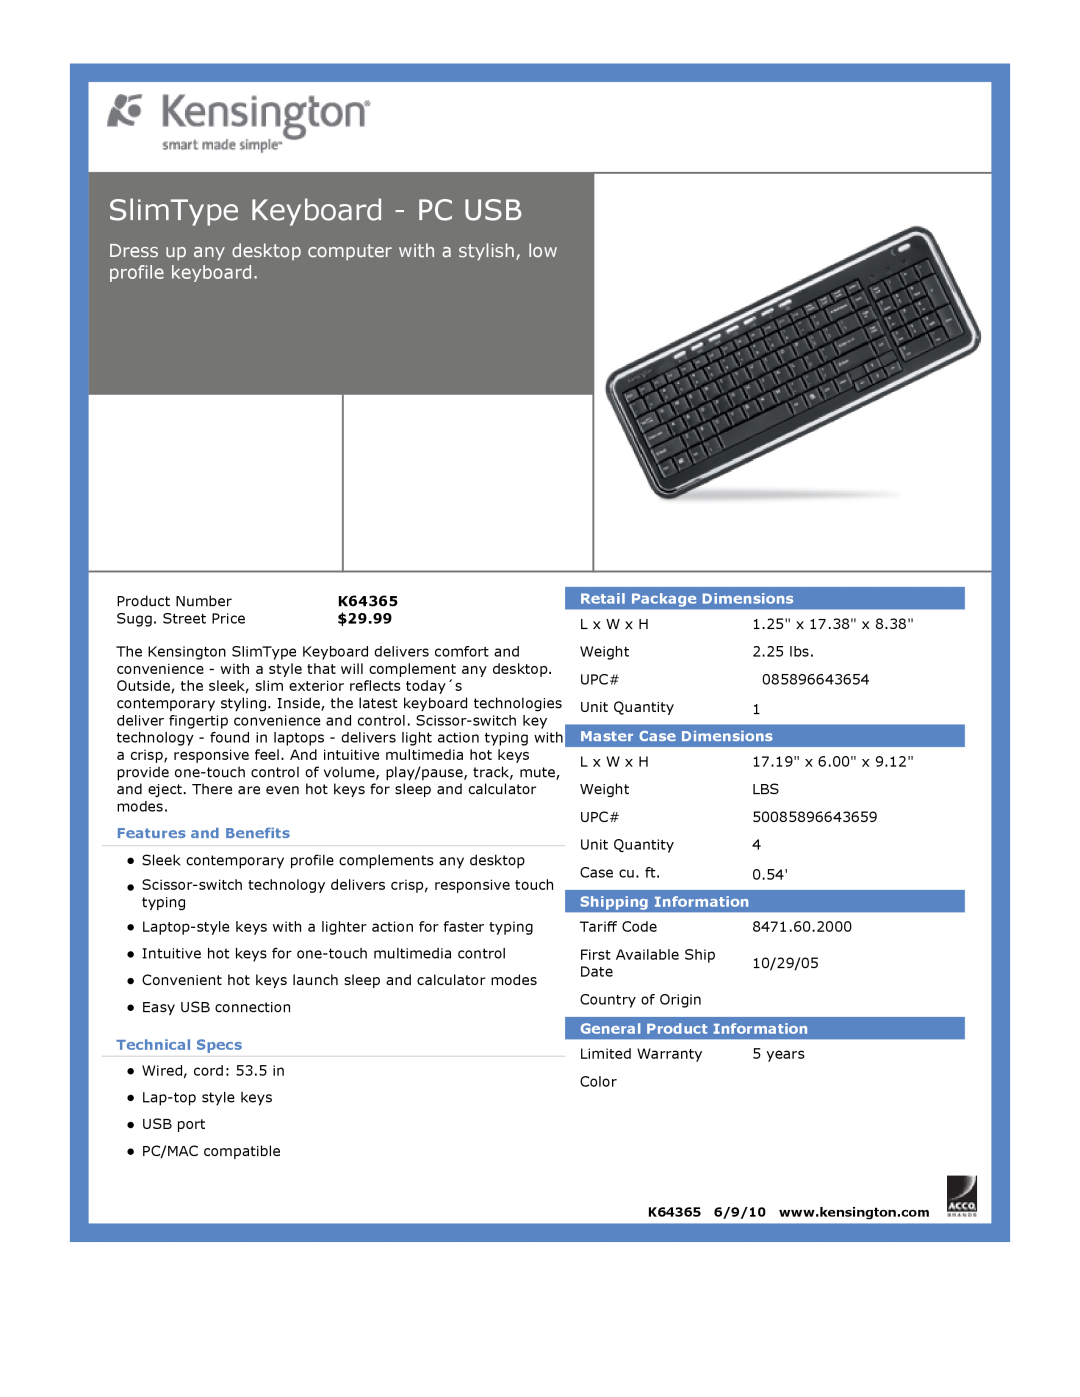 Kensington EU64325 SlimType Keyboard - PC USB, $29.99, Features and Benefits, Technical Specs, Retail Package Dimensions 